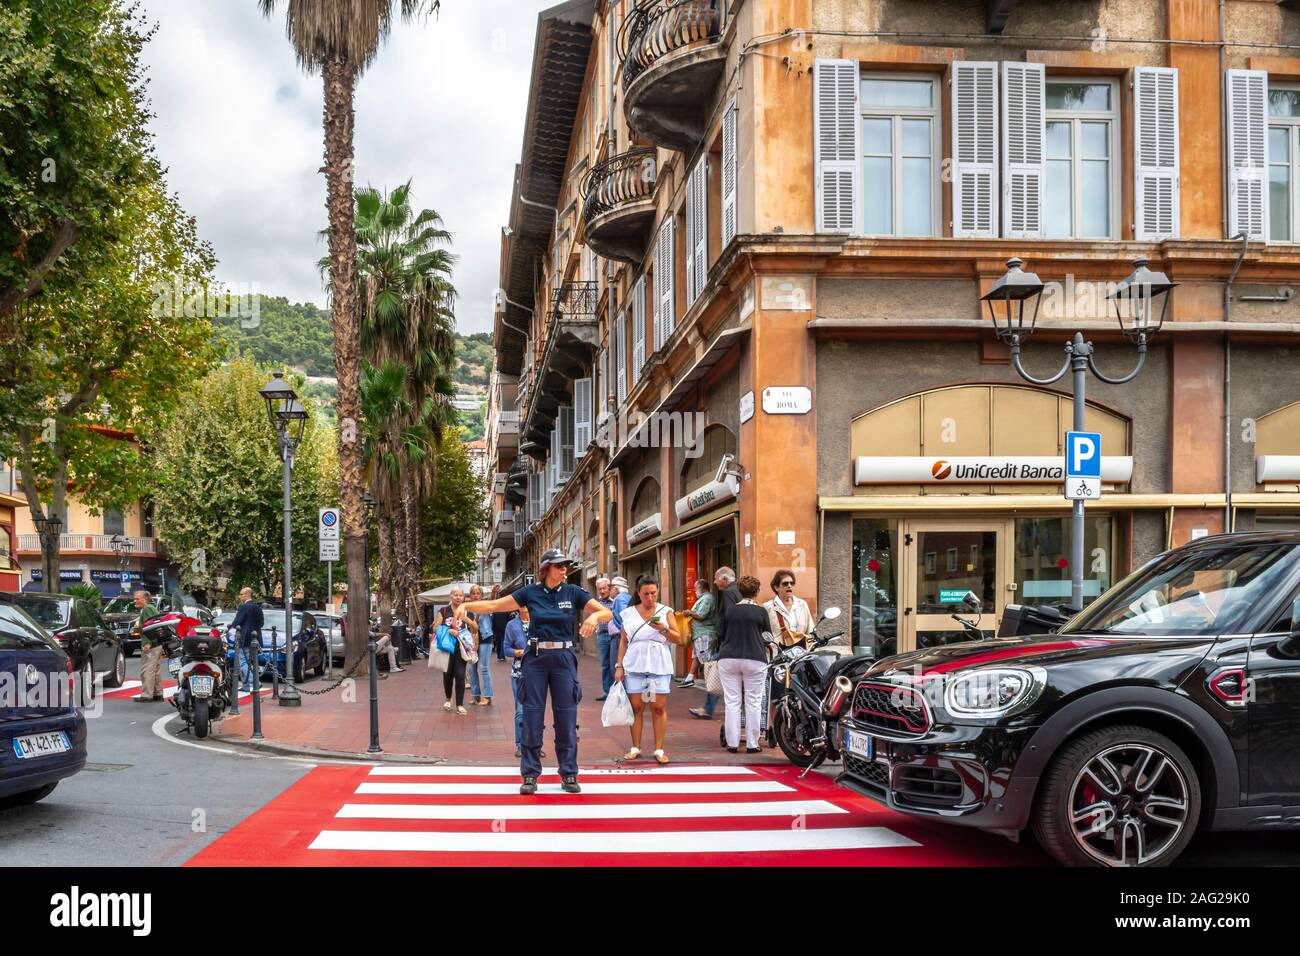 A female policewoman directs traffic at a red and white crosswalk in the urban center of Ventimiglia, on the Italian Riviera. Stock Photo